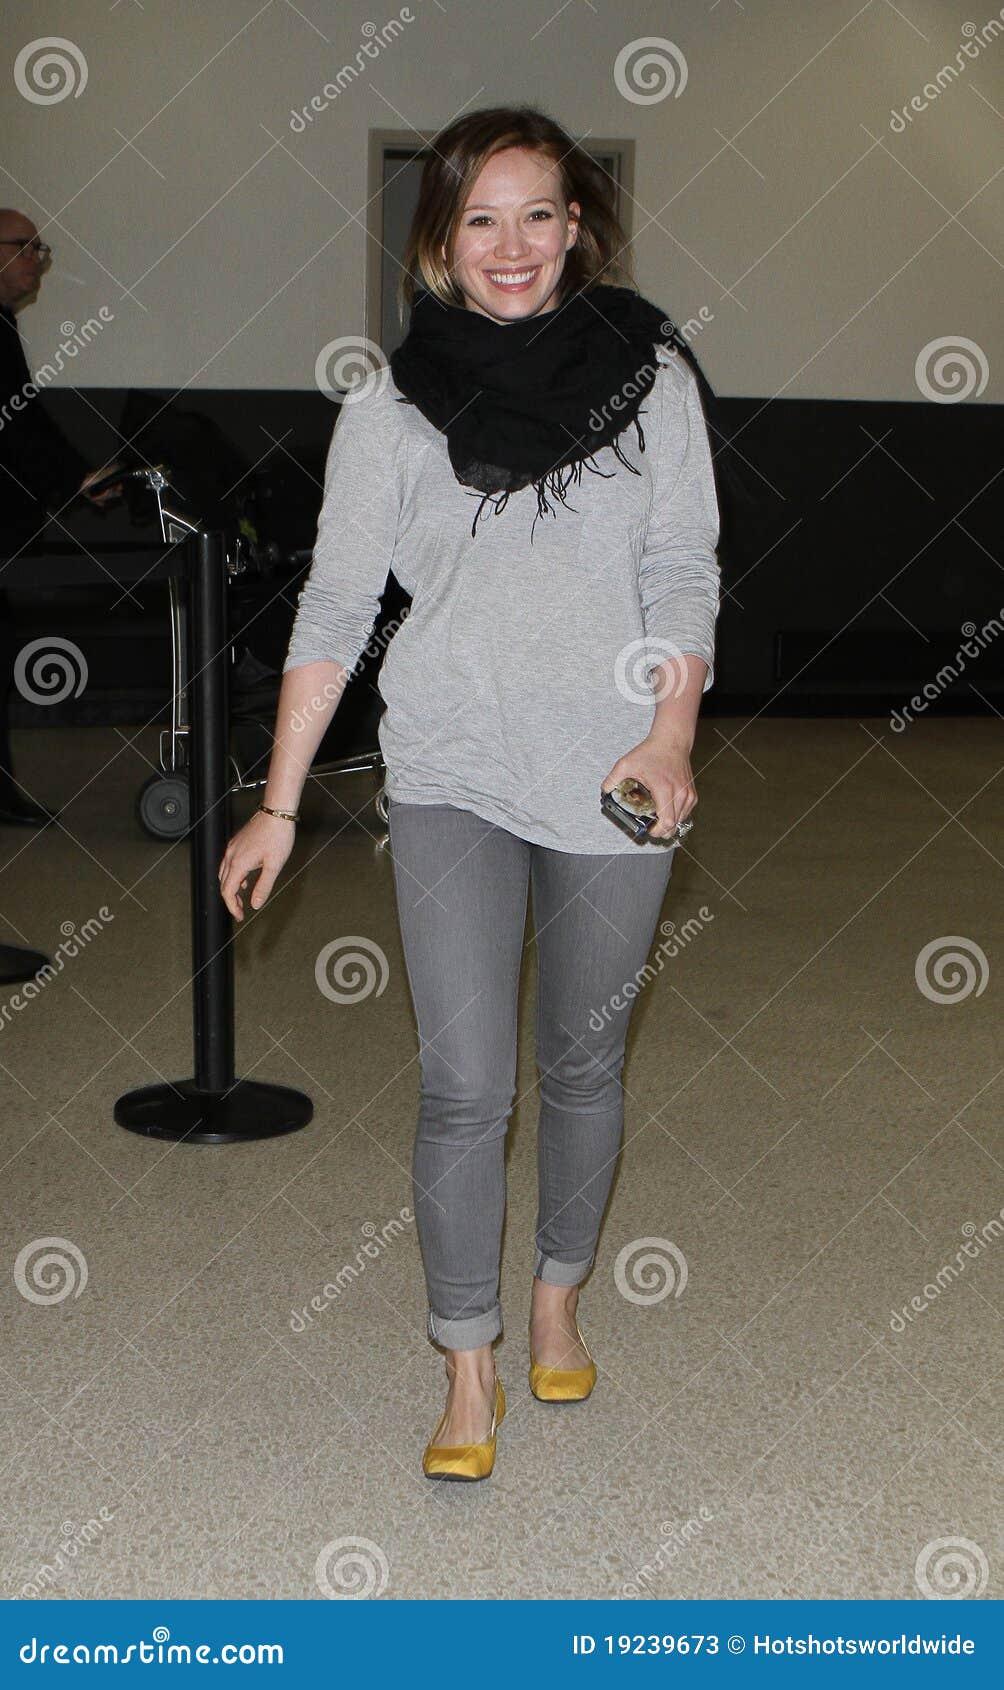 Singer Actress Hillary Duff is Seen at LAX Airport Editorial Stock Photo -  Image of female, girl: 19239673